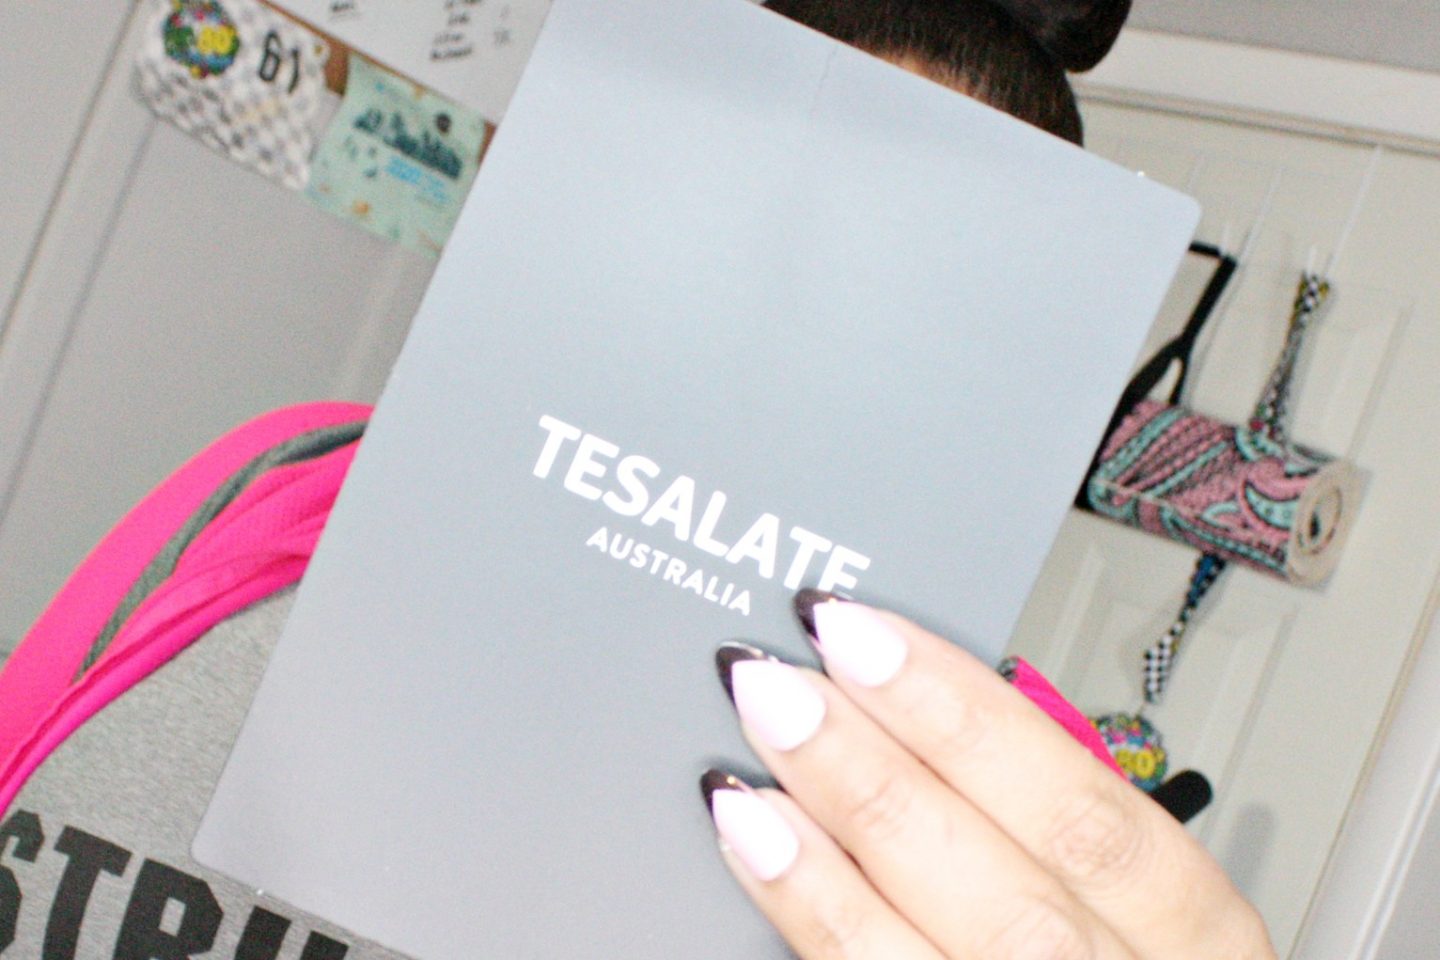 Teslate Workout Towels Review
